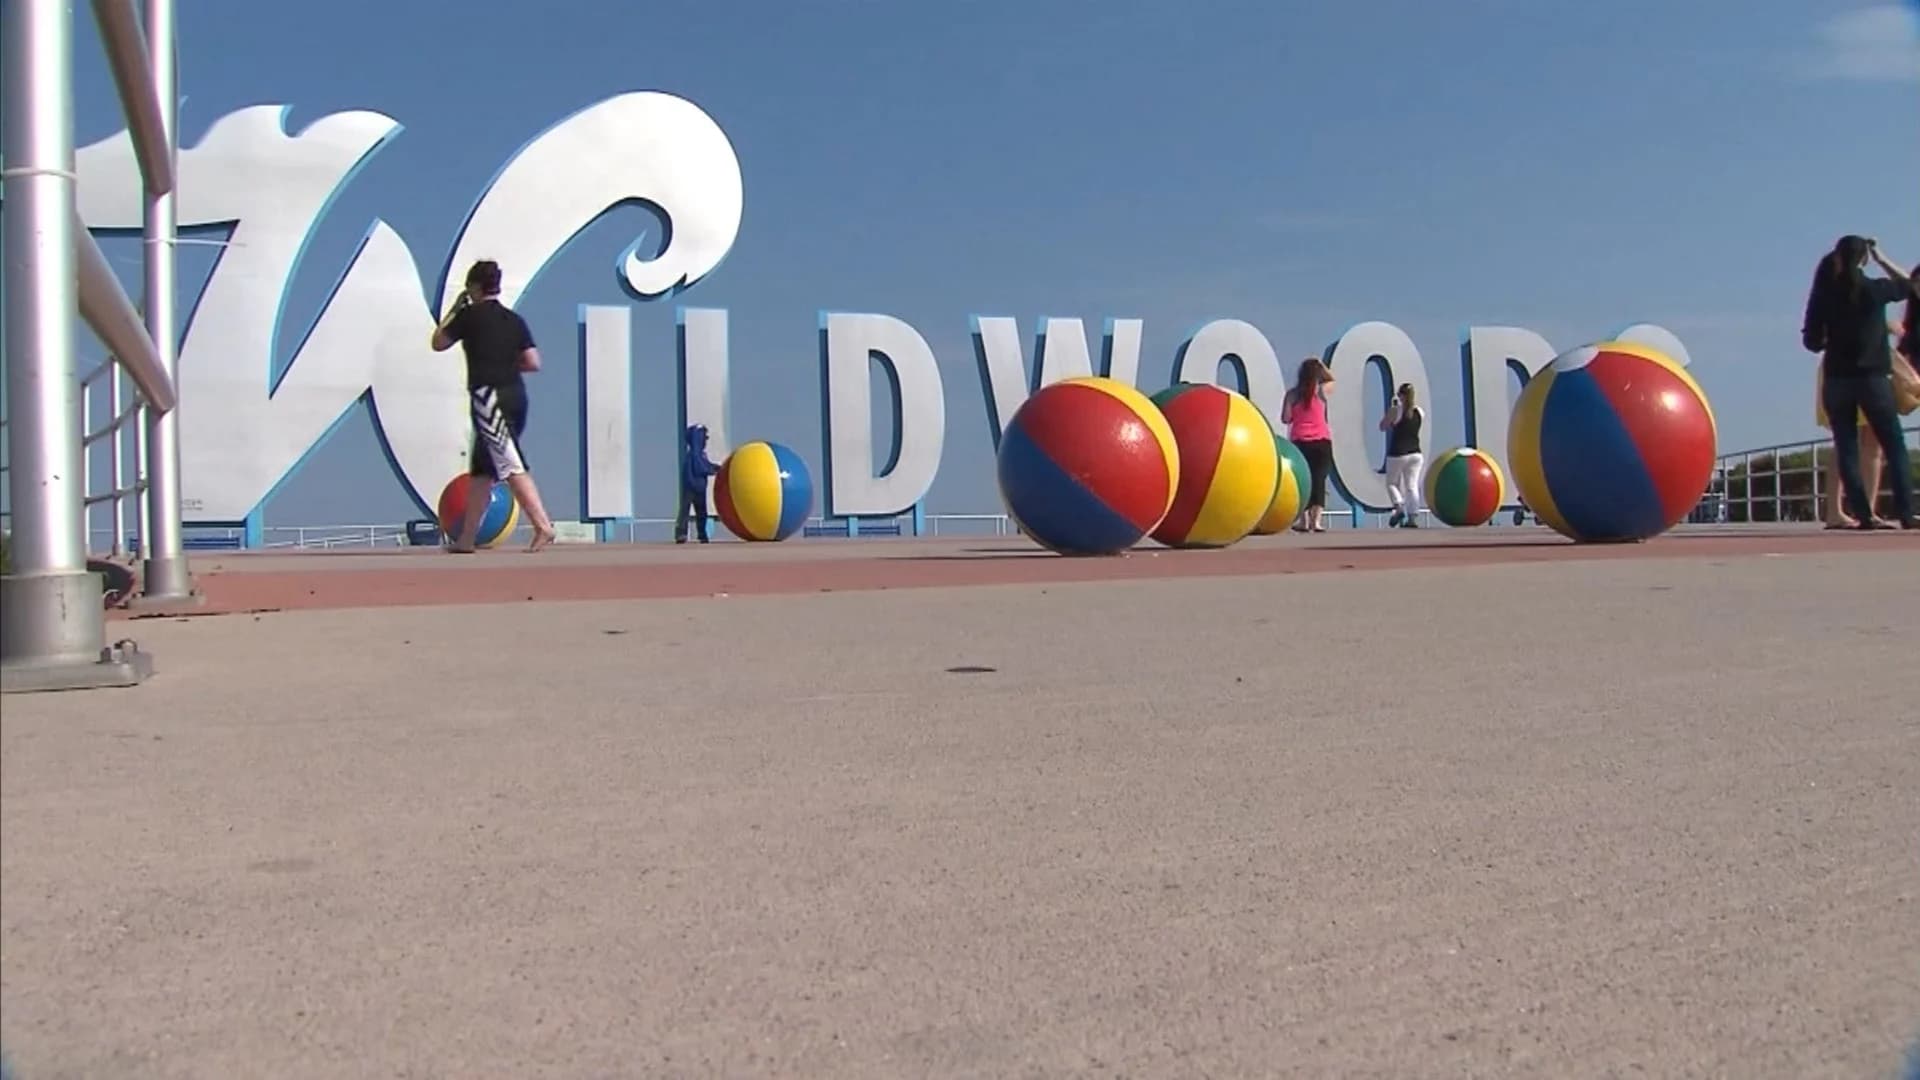 3-day country music festival coming to Wildwood in 2020